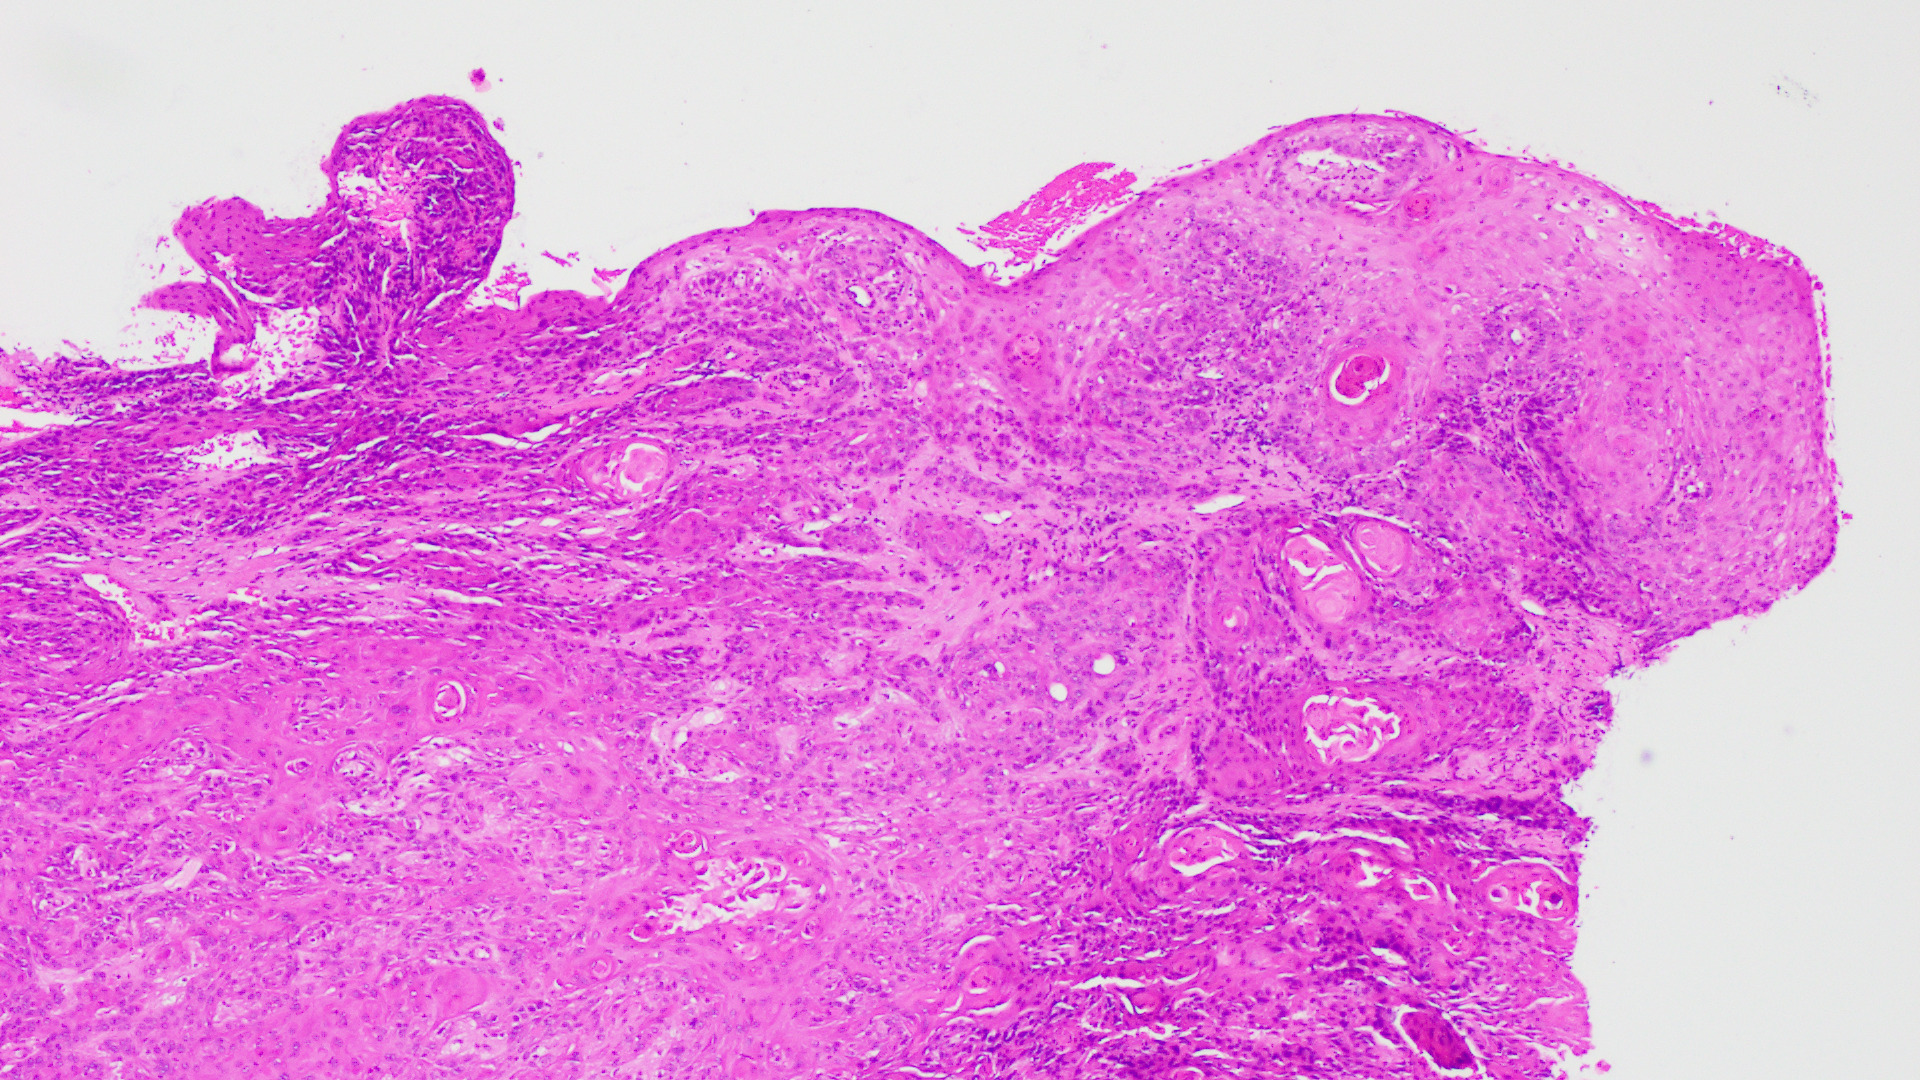 Histopathology Image of Vulvar Squamous Cell Carcinoma Low Power Field, H&E stain, showing keratinized pearls. 